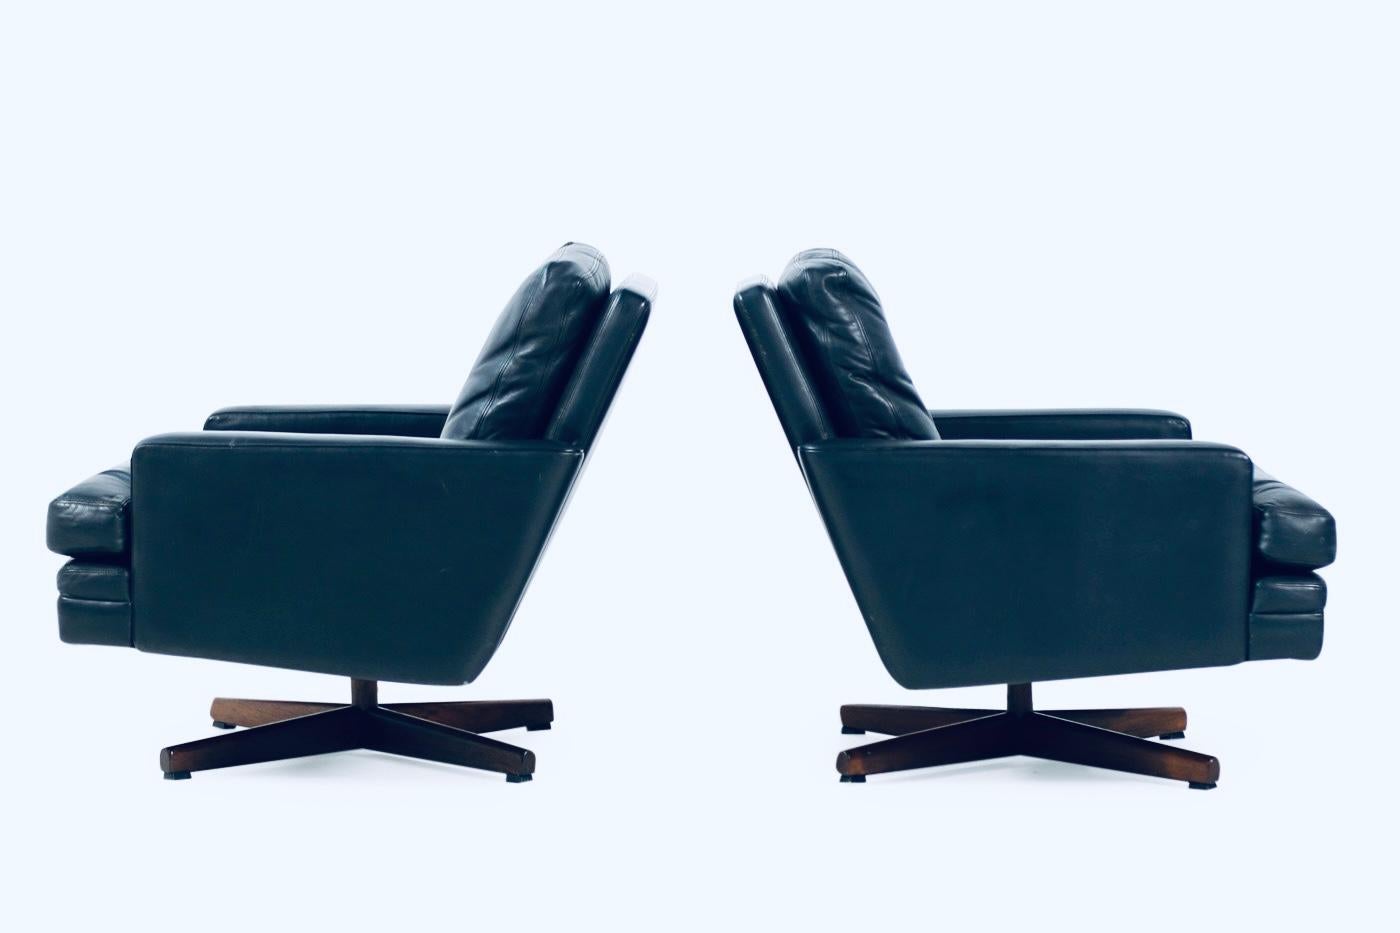 Introducing an exquisite pair of leather lounge chairs that are sure to steal the show in any room. Don't let this rare find pass you by! The Fredrik A. Kayser for Vatne Mod. 807 leather and rosewood swivel lounge chairs are a masterpiece of